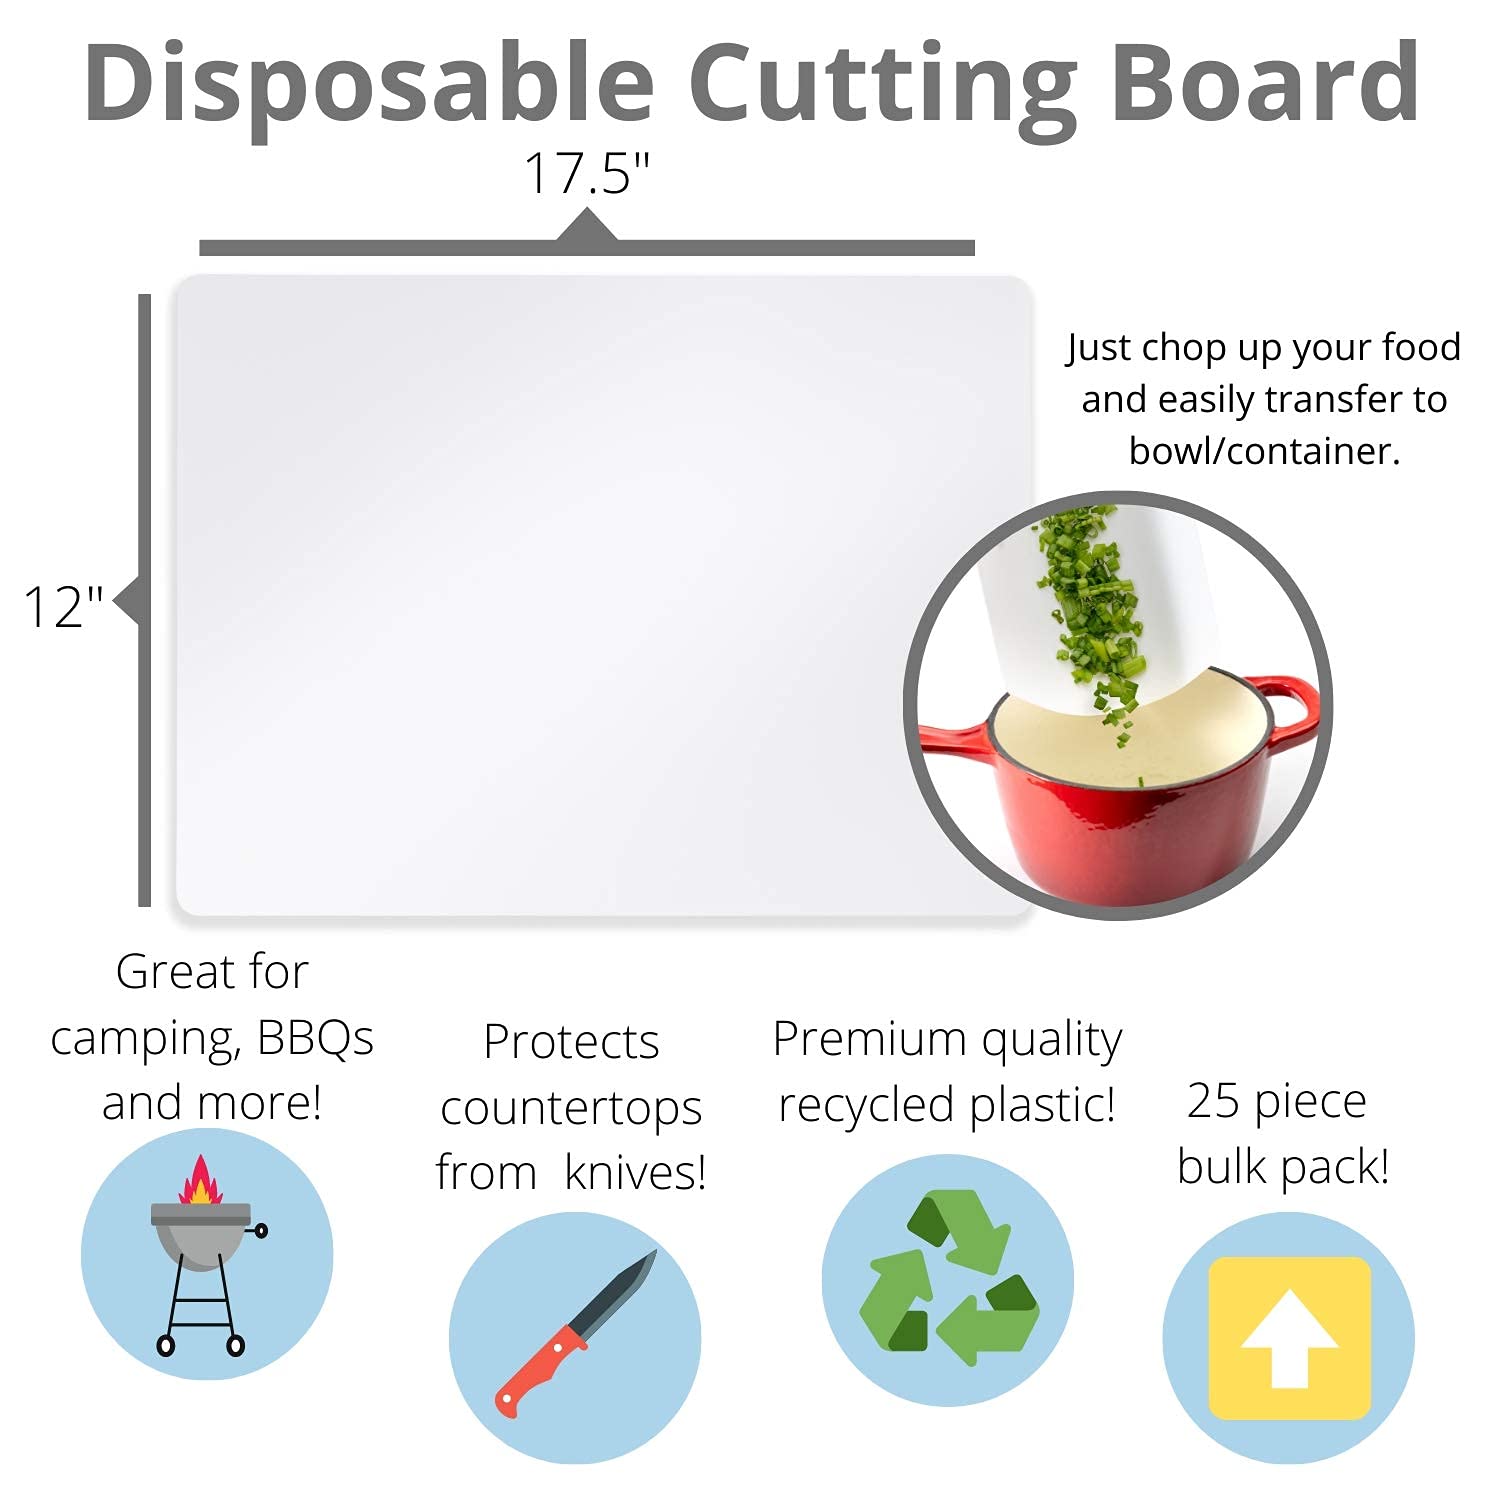 10 In. X 13.5 In. Premium Quality Disposable Cutting Board | 50 Count